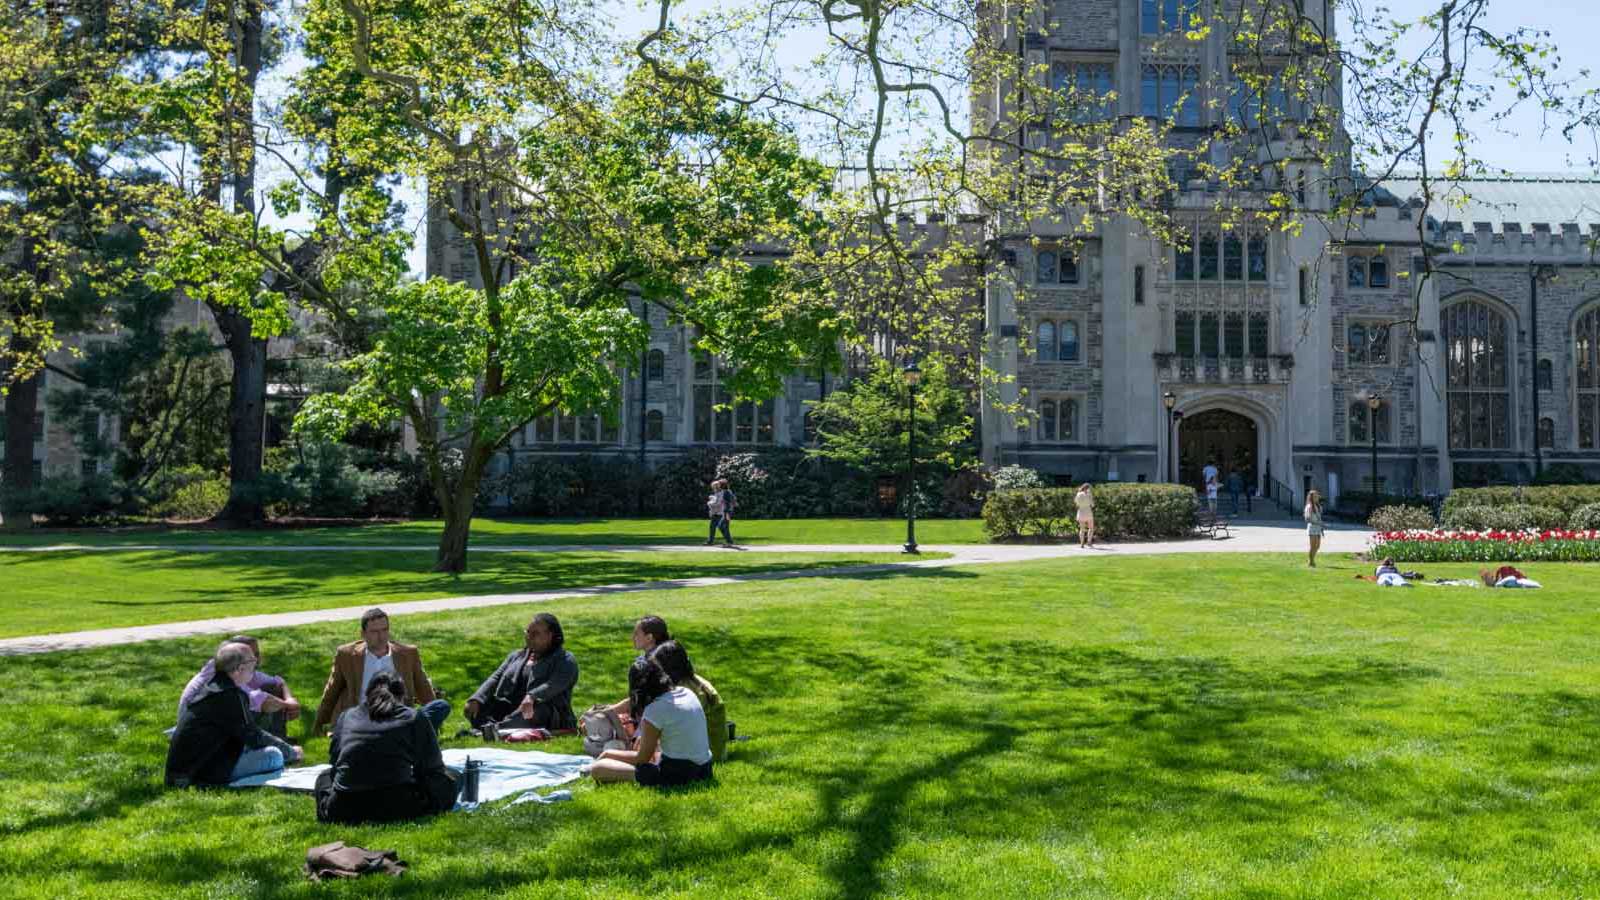 Group of people seated on a lawn in front of Thompson library on Vassar campus